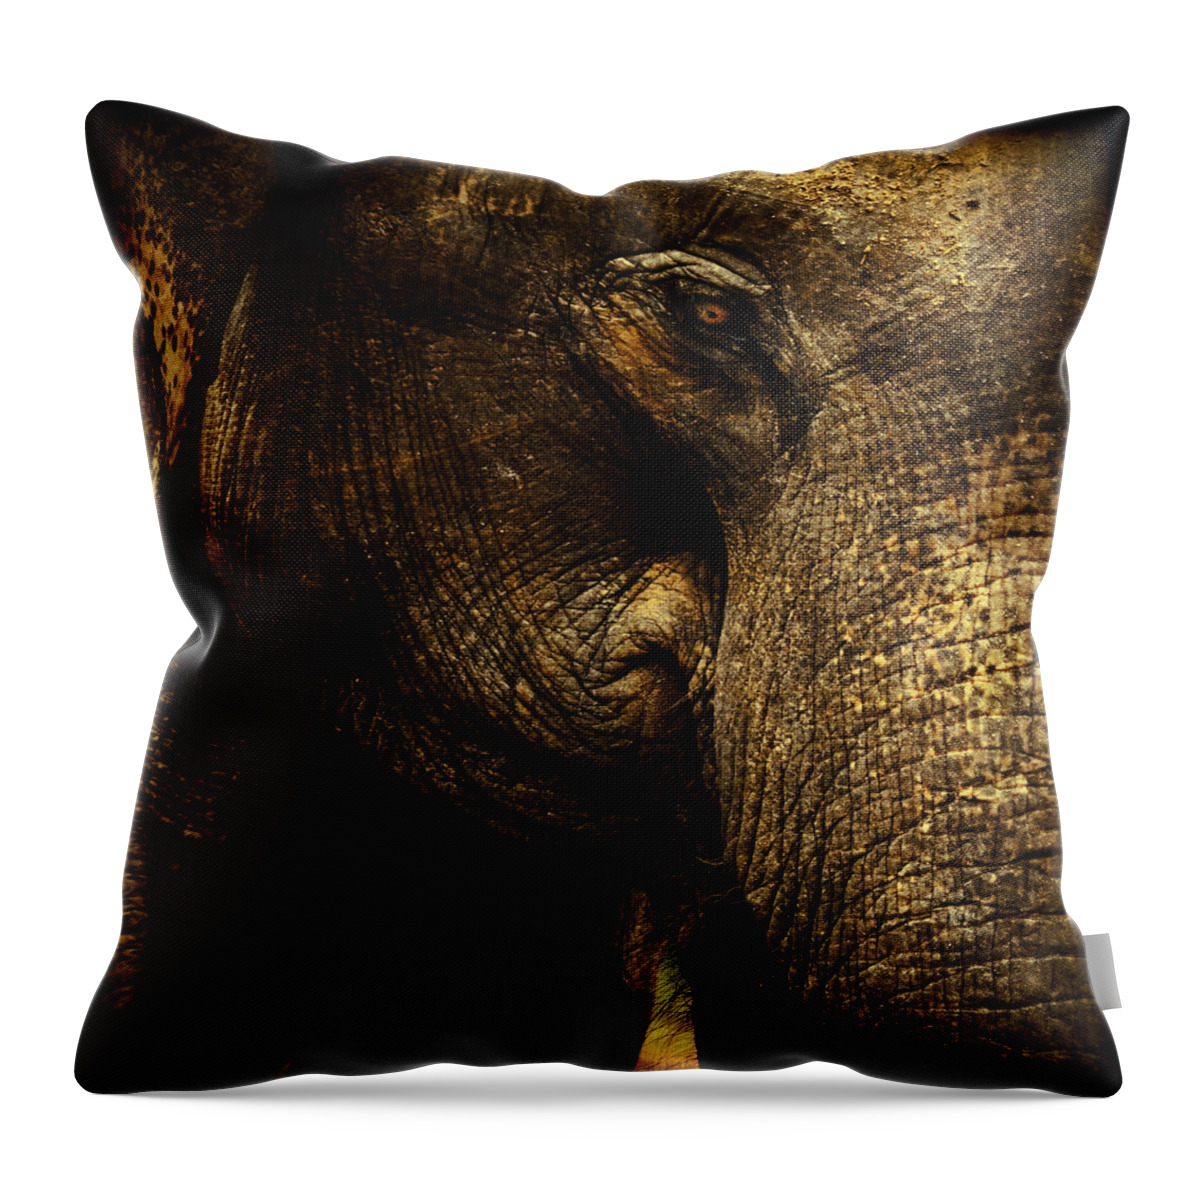 Elephant Throw Pillow featuring the photograph Knowing by Andrew Paranavitana